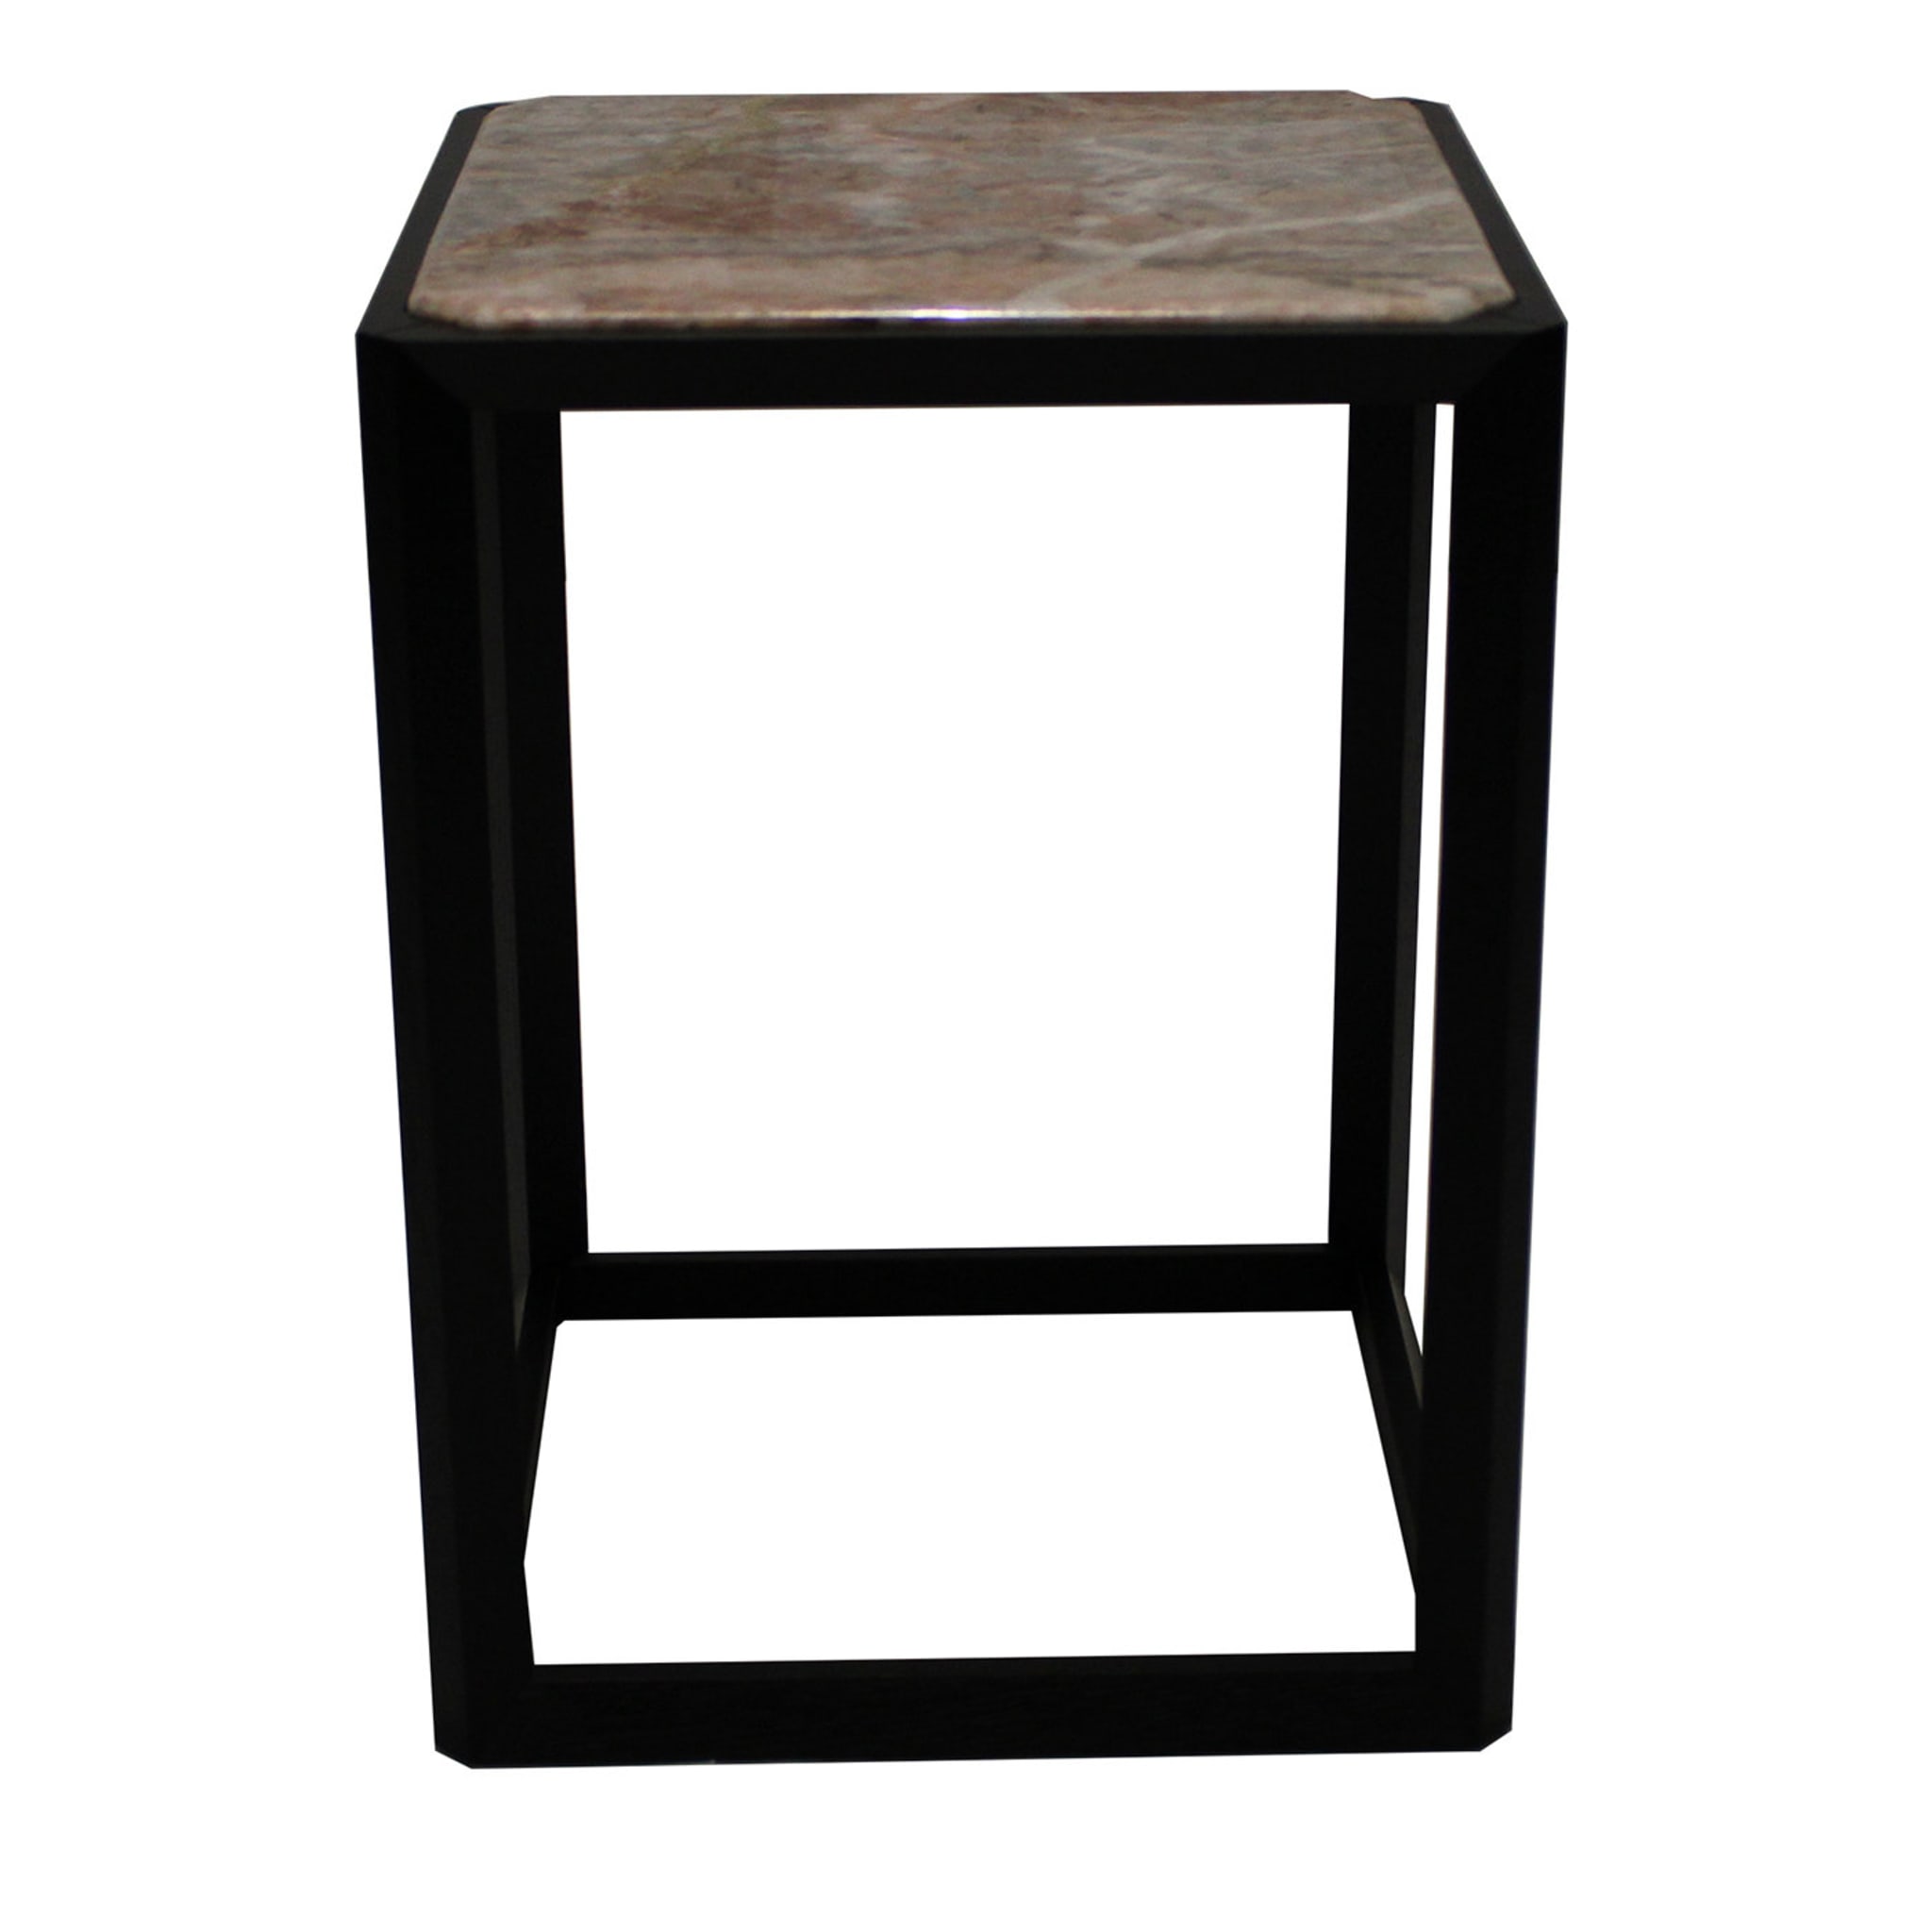 Teler Marble side table small - Main view